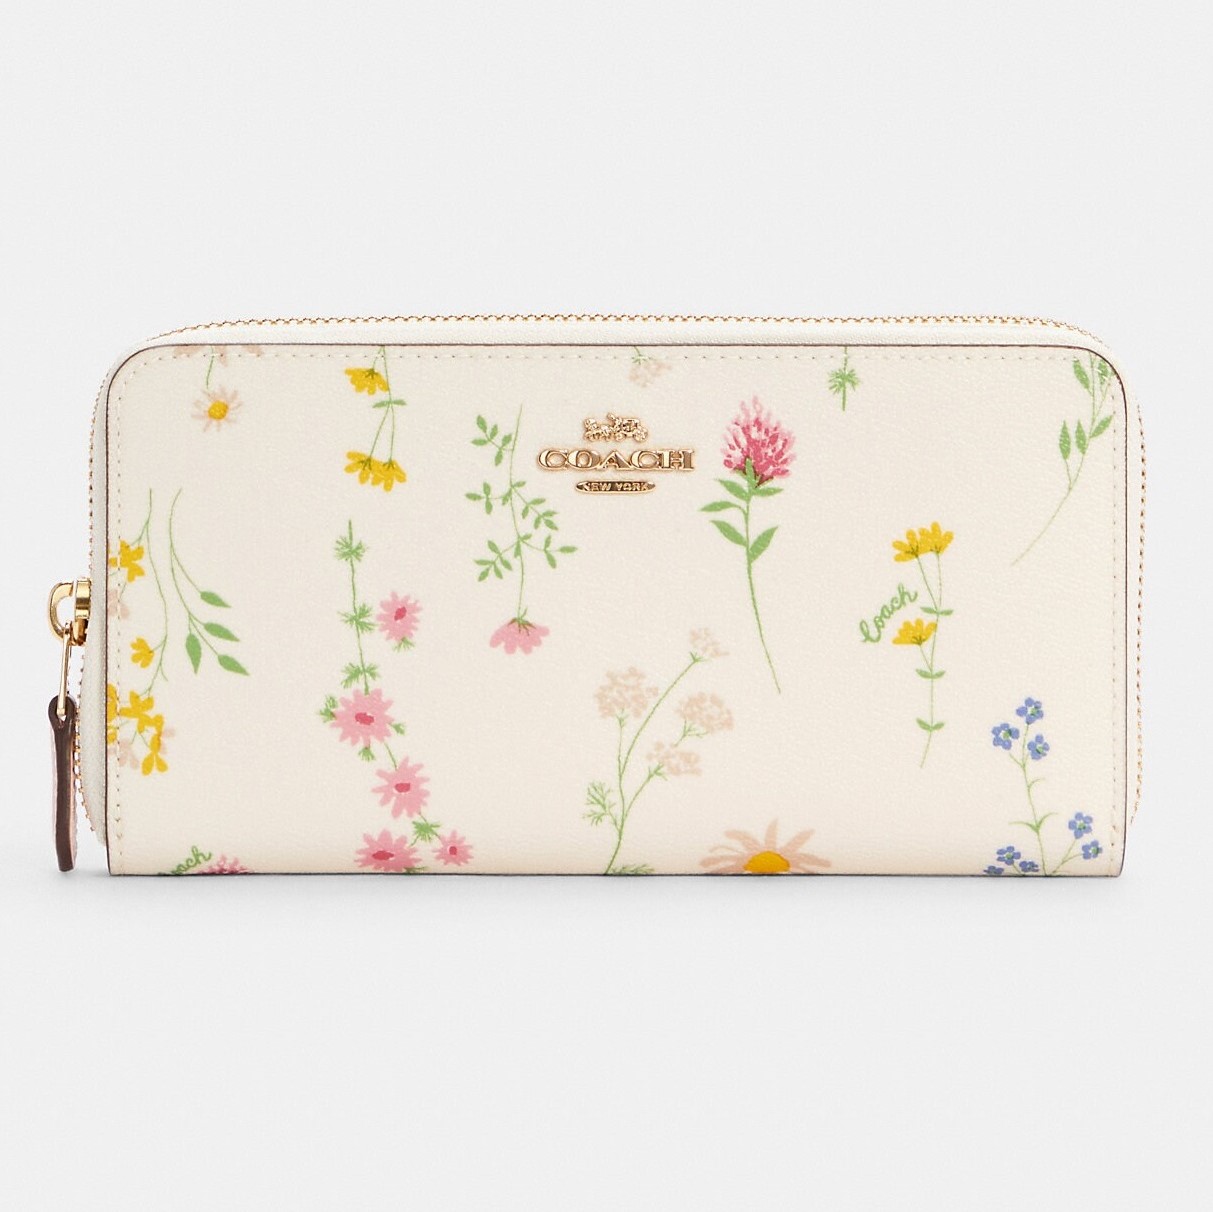 VÍ COACH IN HOA ACCORDION ZIP WALLET WITH SPACED WILDFLOWER PRINT C0033 1